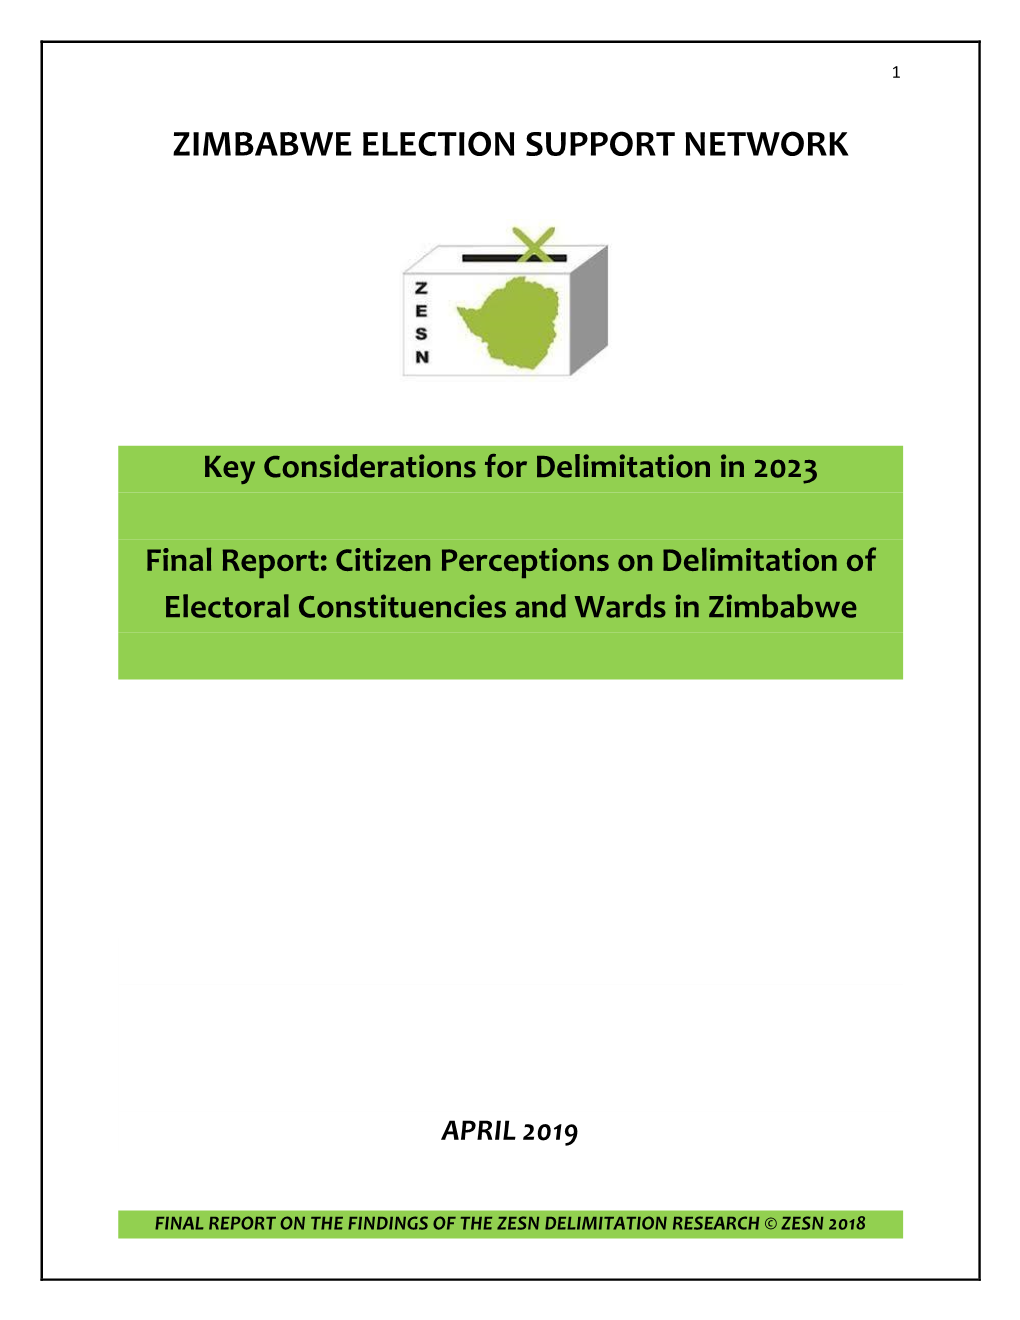 2. Legal Framework on the Delimitation of Constituency Boundaries